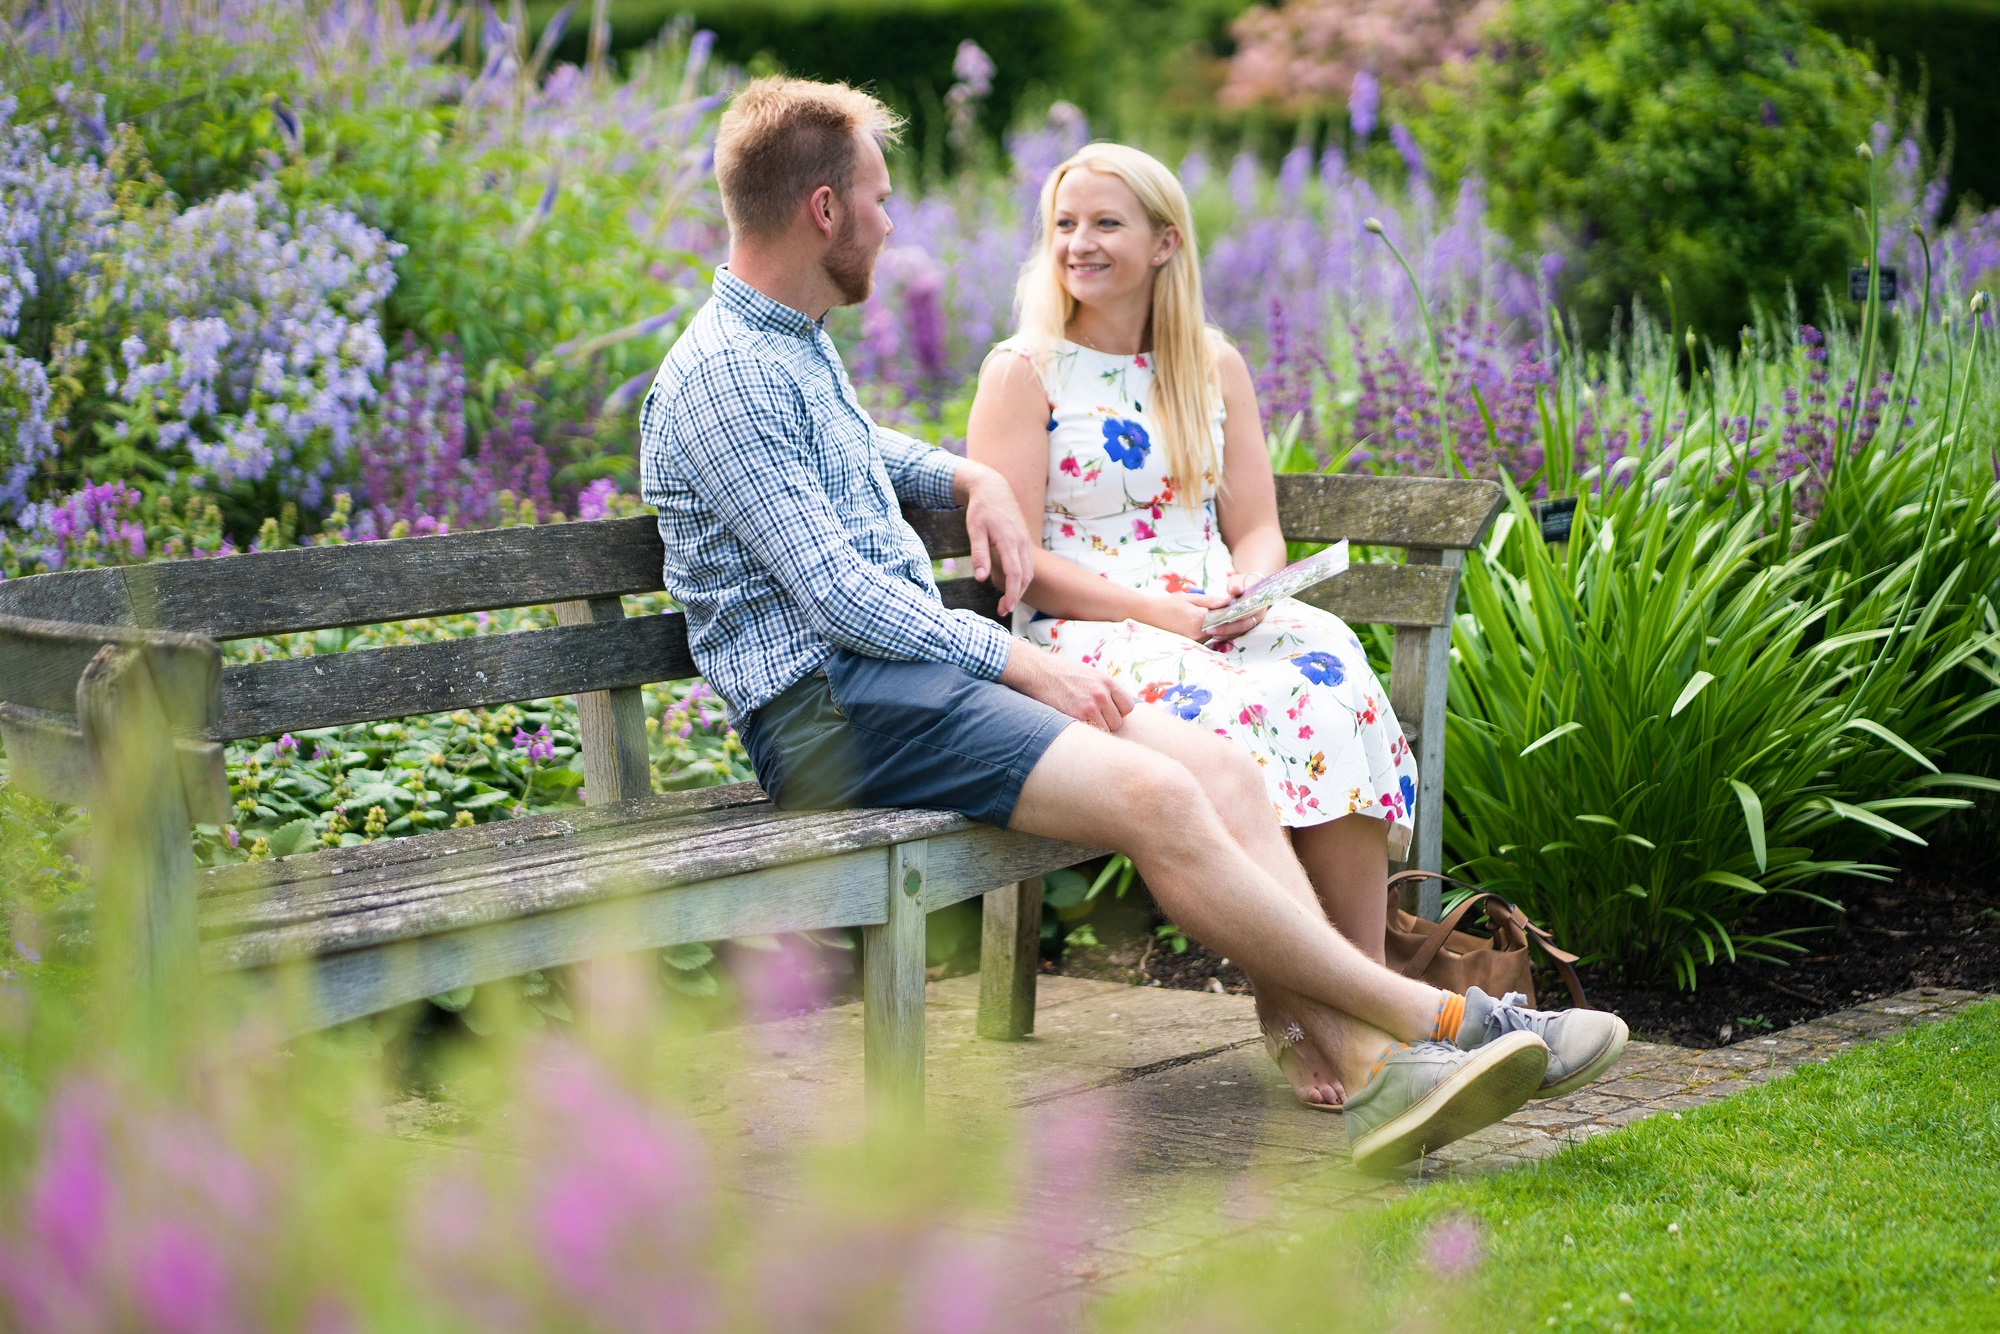 A couple sit on a bench in The Savill Garden, surrounded by purple flowers.